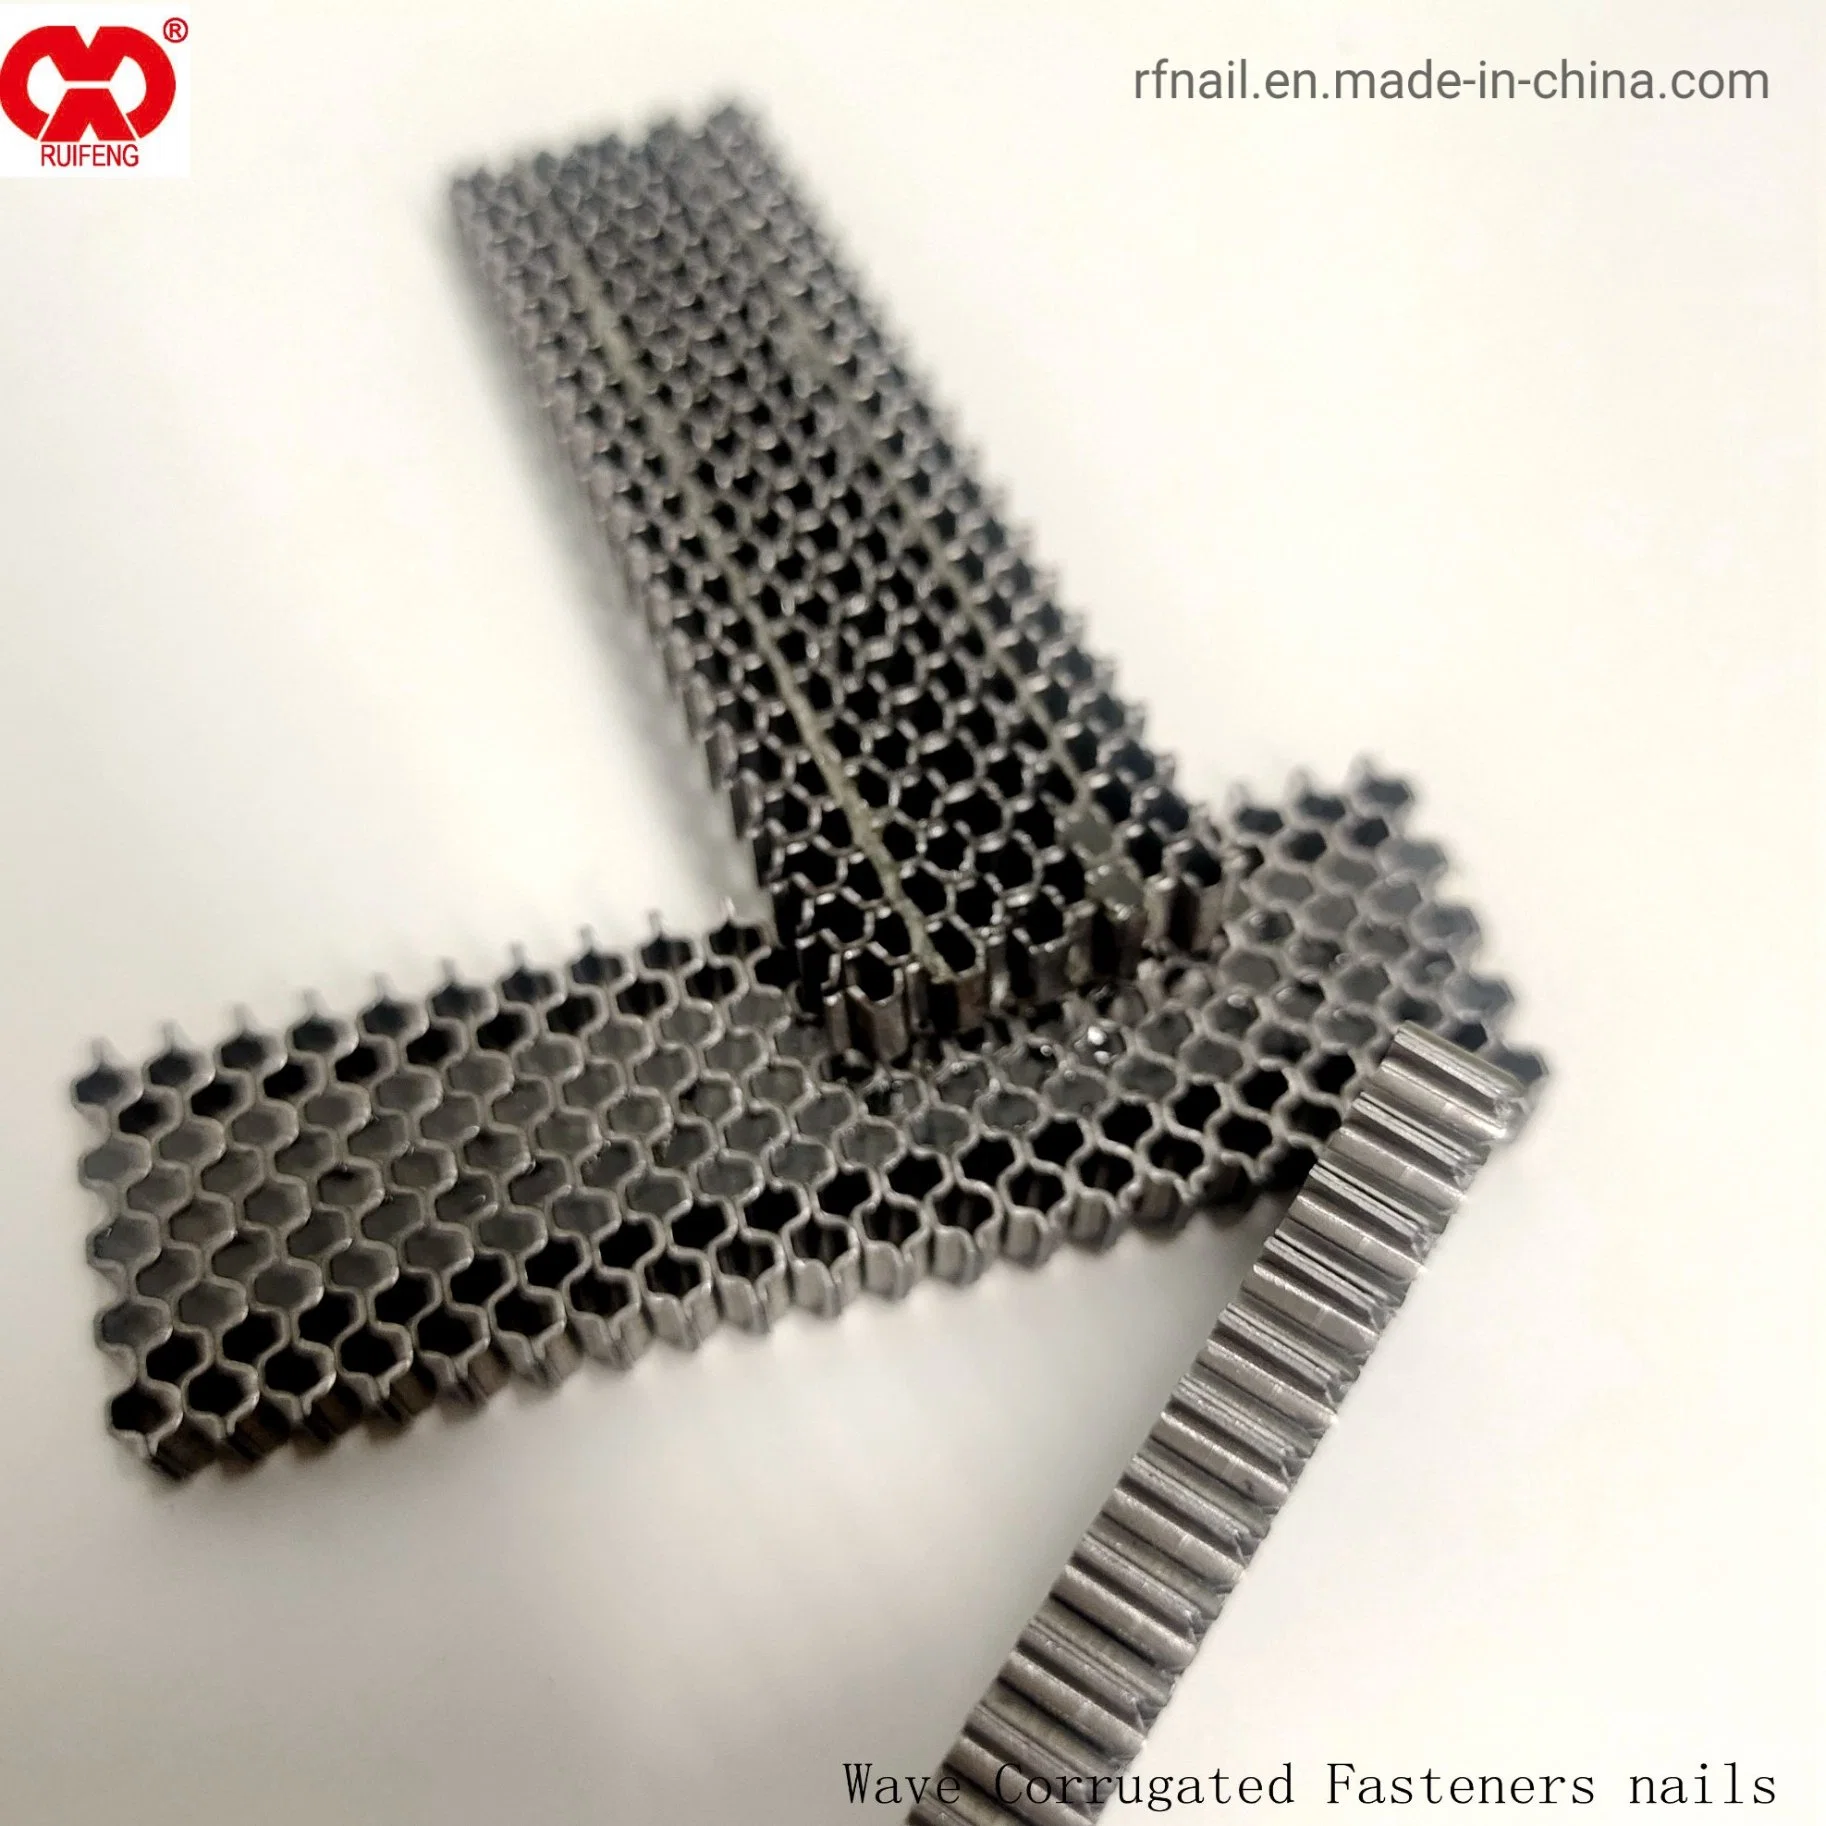 Common Round Iron Wire Nail in China Wholesale/Supplier Supplier Stock Lot X Series Wave Corrugated.